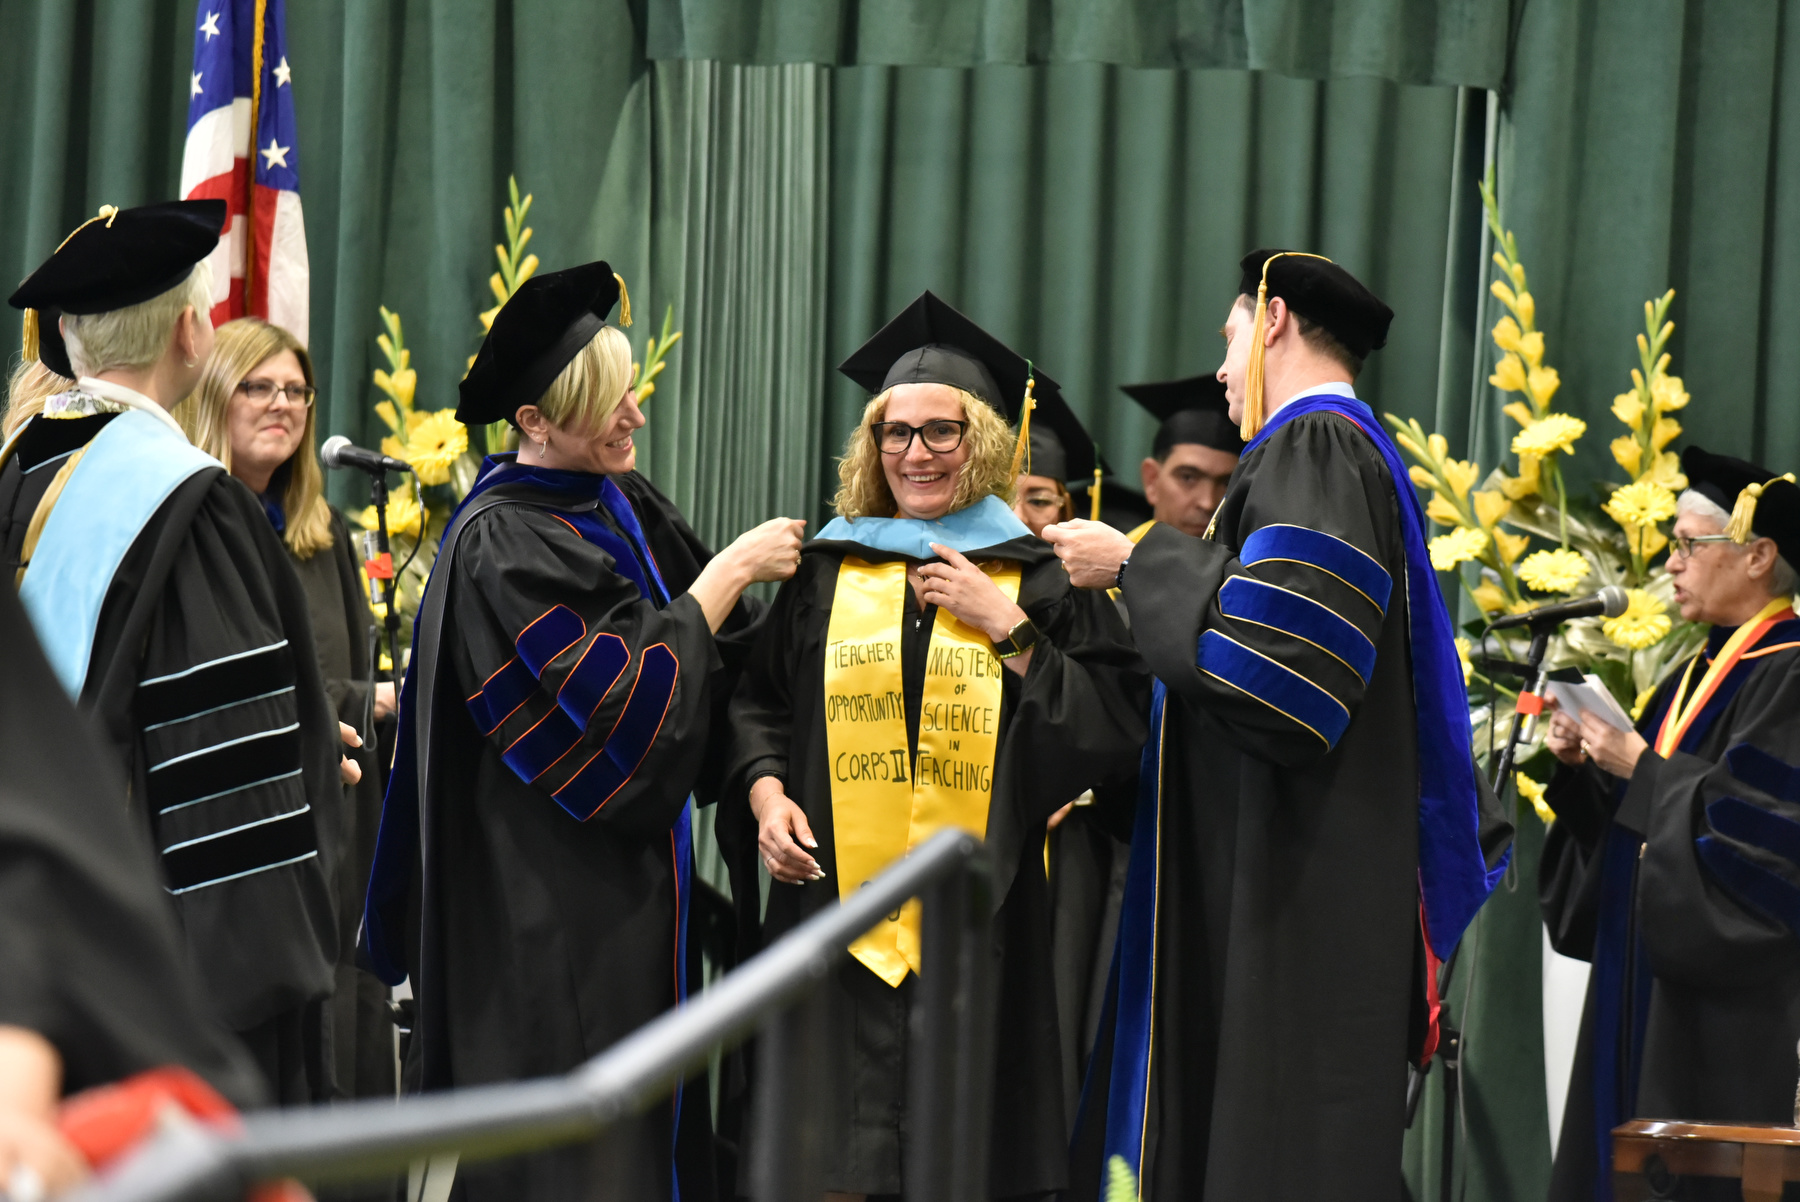 Master’s degree candidates are bestowed with their hoods on the platform during the School of Education commencement by Dean of Education Laura Spenceley and Provost Scott Furlong.